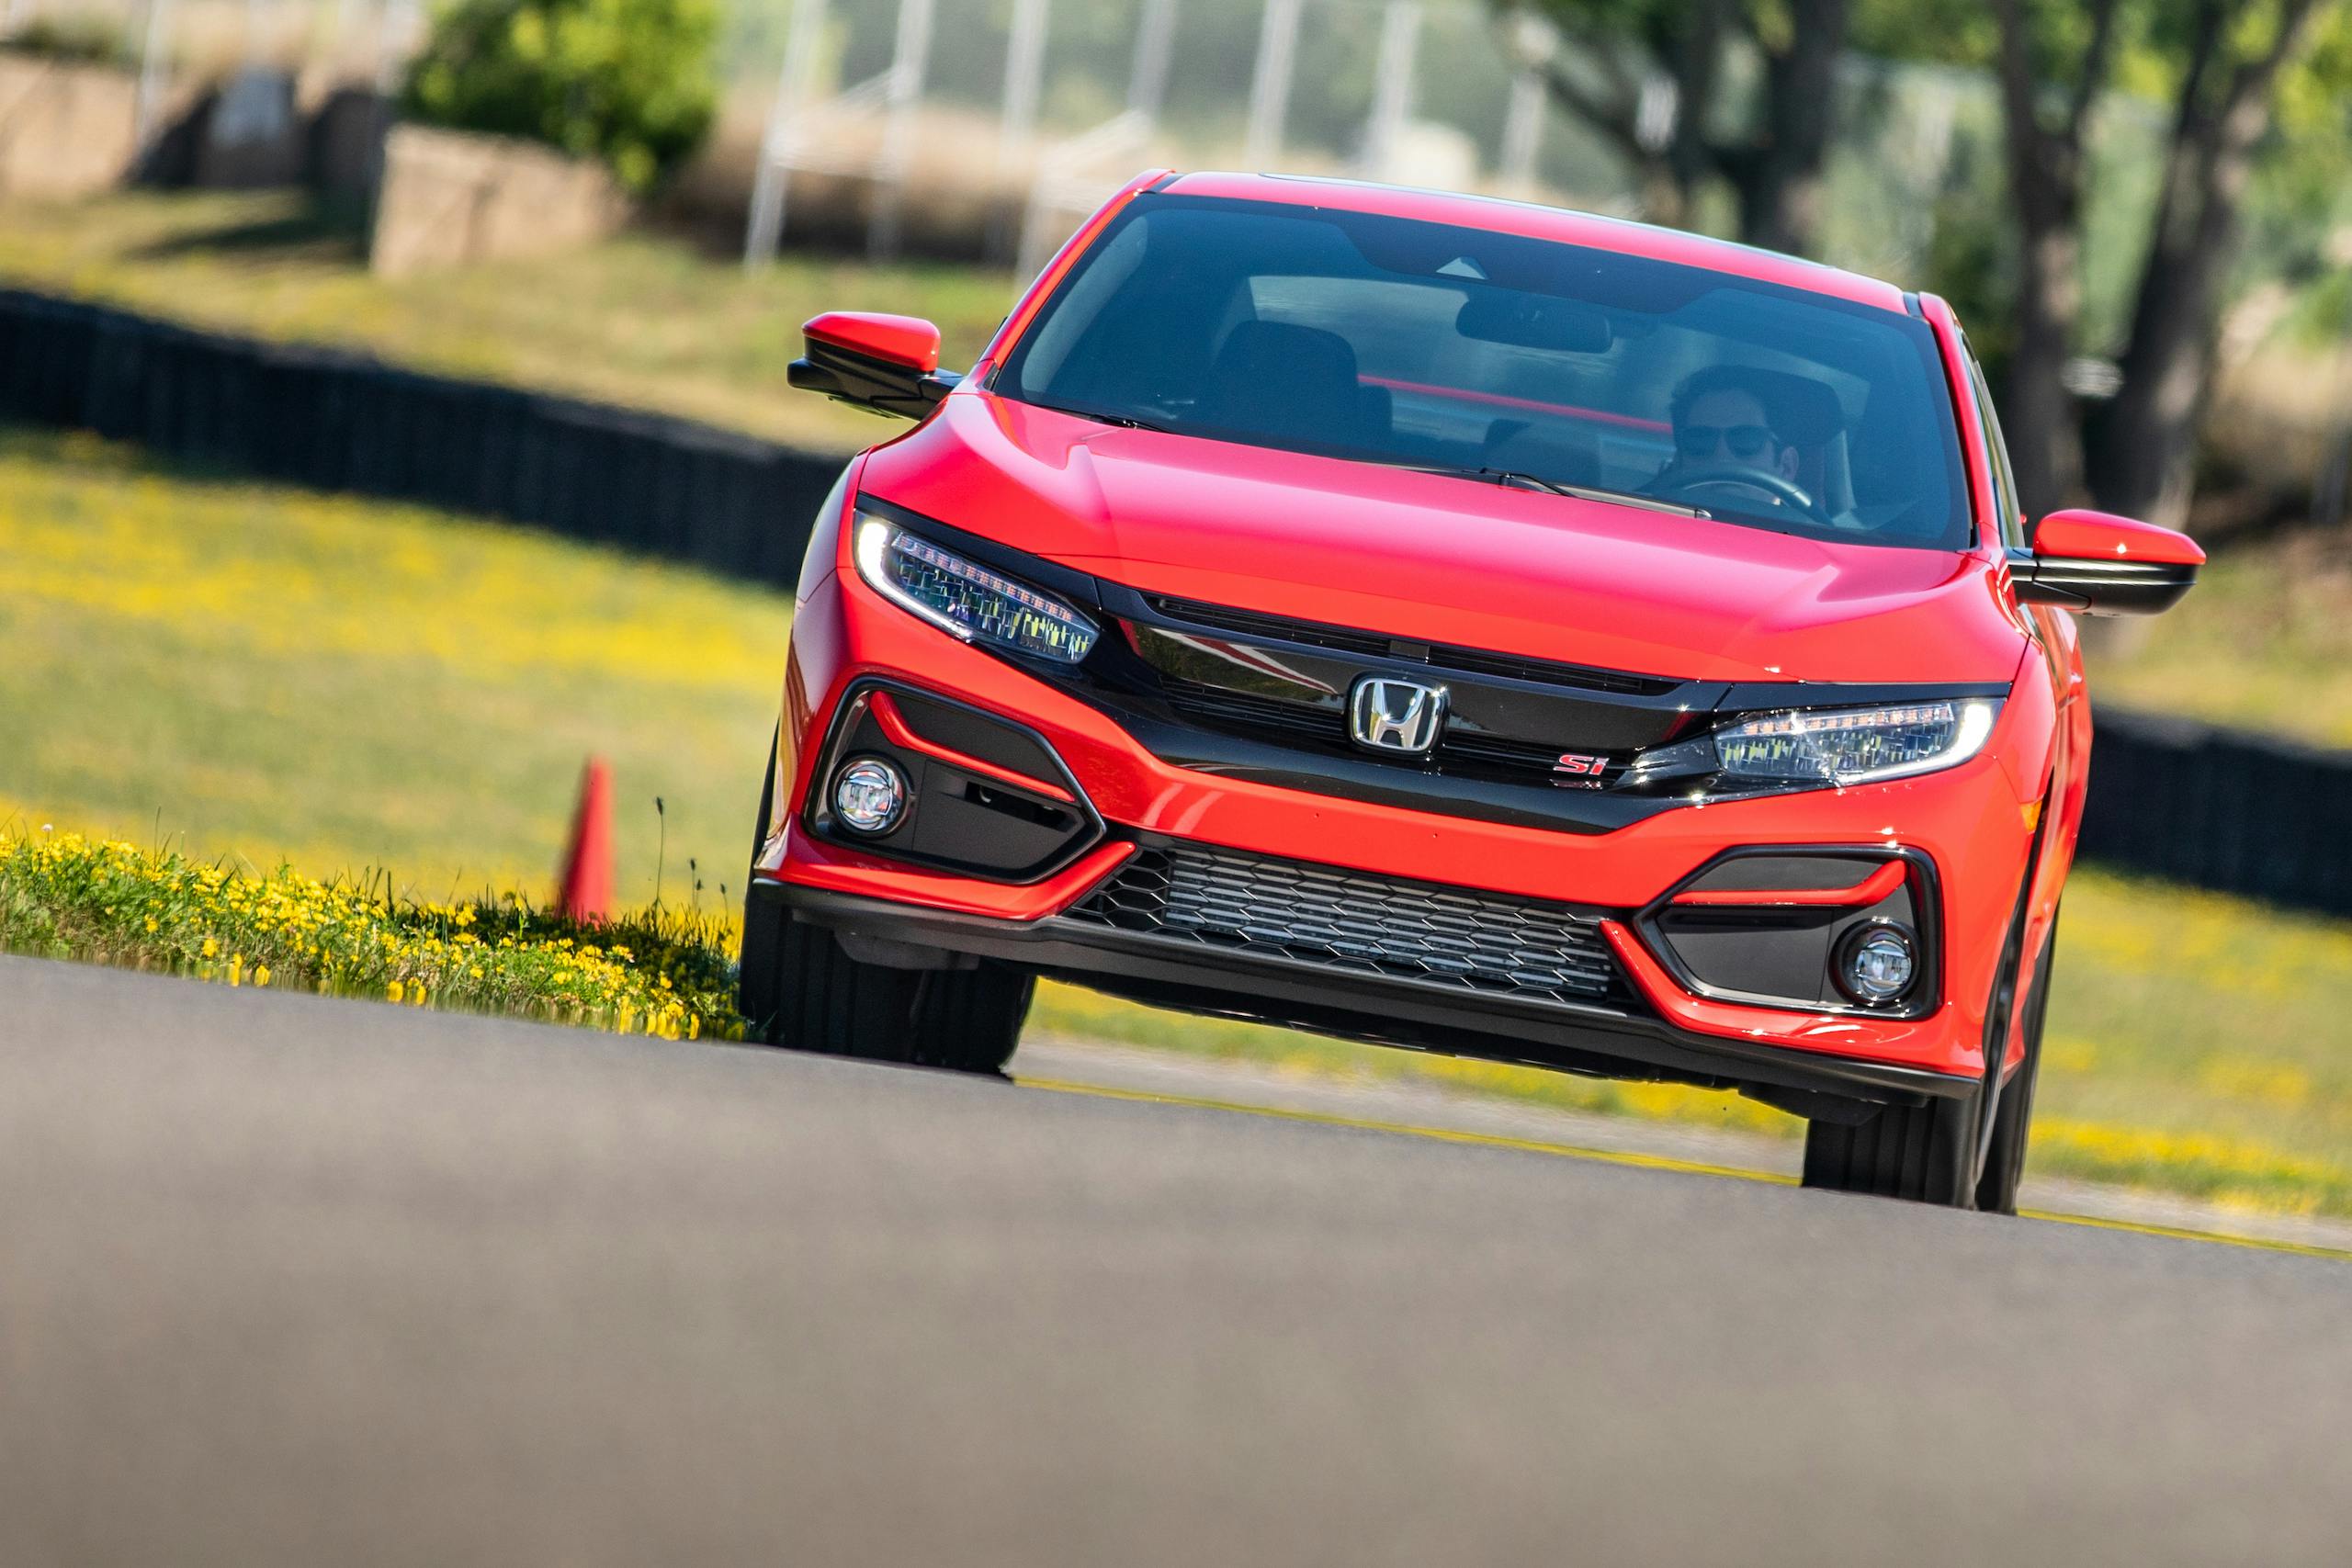 2020 Civic Si front track action